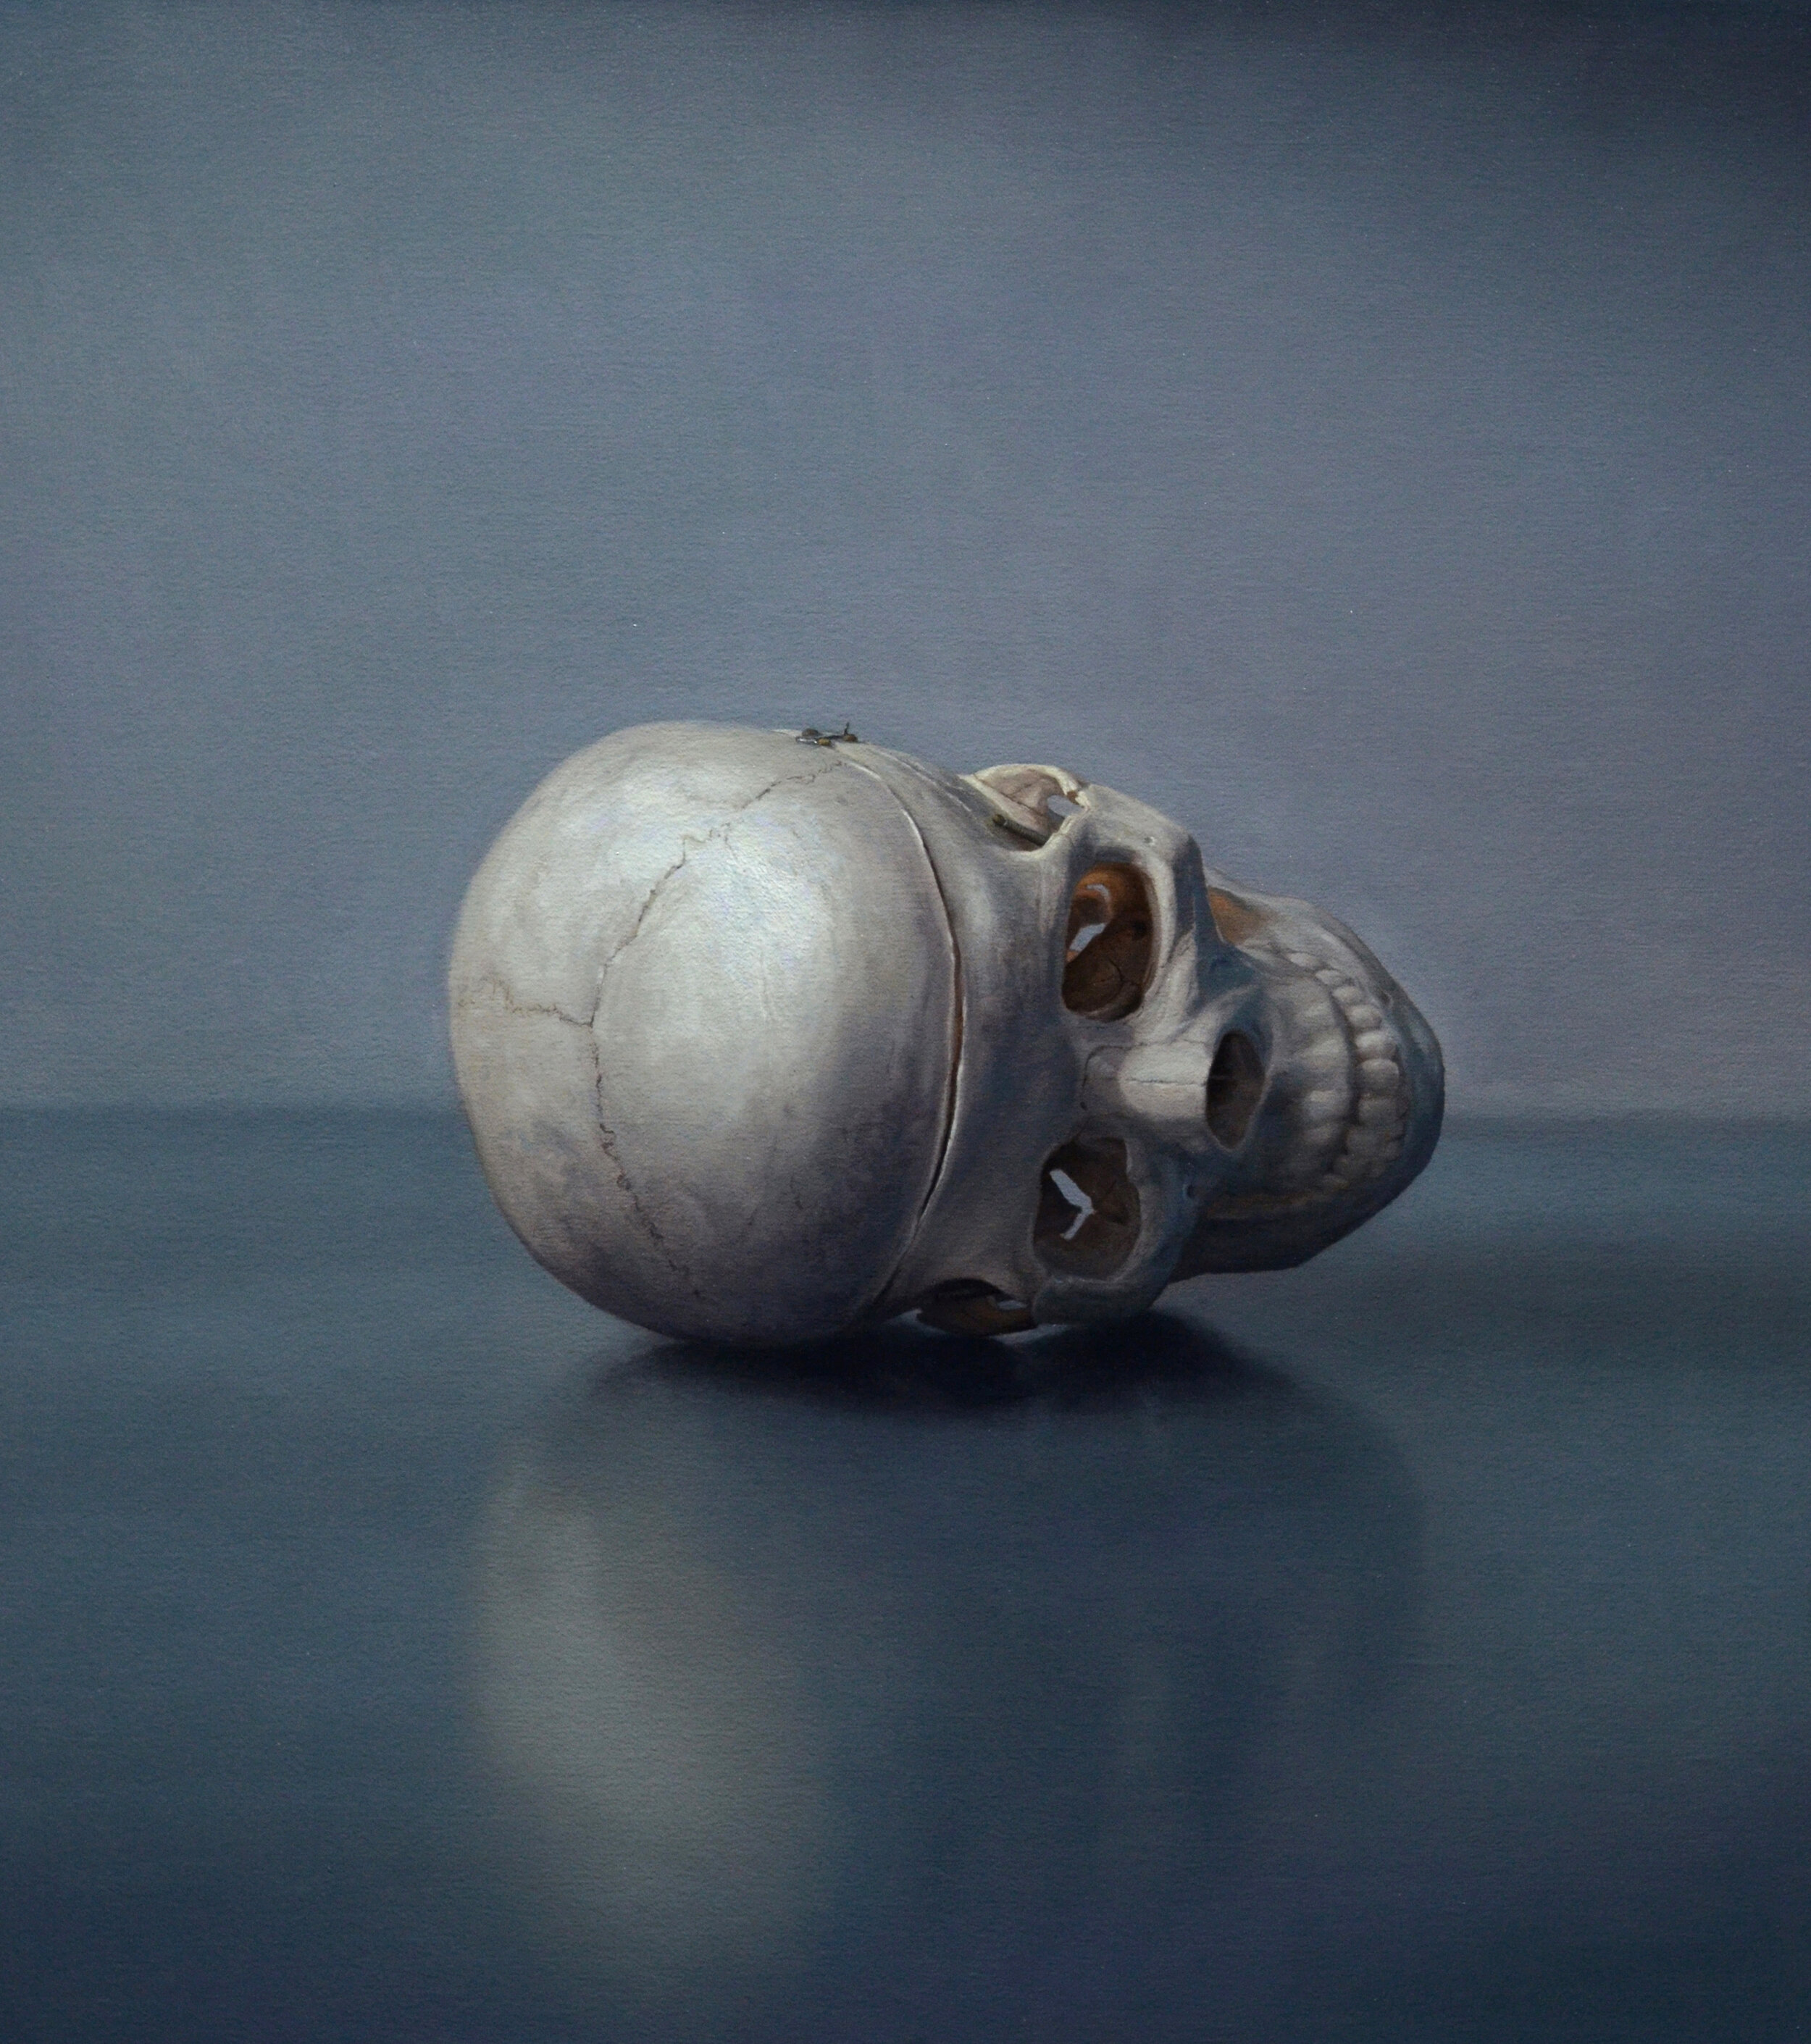   Skull , oil on linen mounted to board, 20” x 16”, 2020  This piece is part of a body of recent work currently on view at Winfield Gallery in Carmel-by-the-Sea, CA. https://winfieldgallery.com/ 